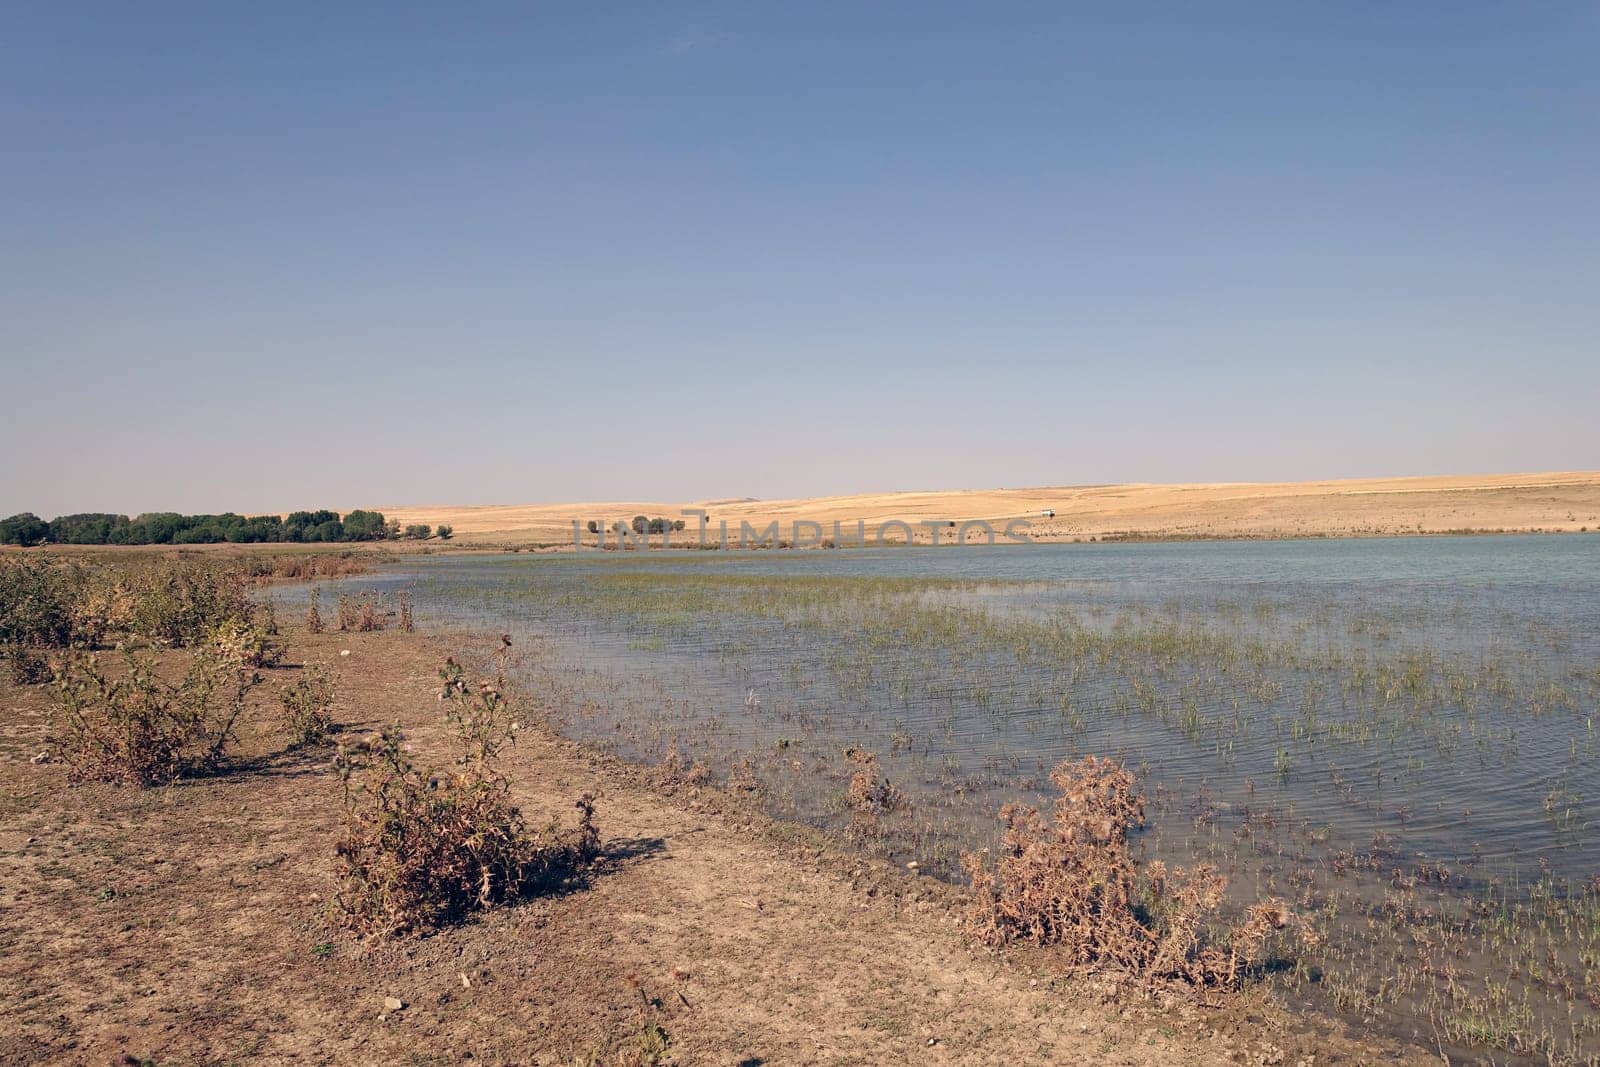 The irrigation dam of a village has lost a lot of water as a result of drought, the pond whose water has decreased, the tragic situation of the drought and irrigation pond, by nhatipoglu